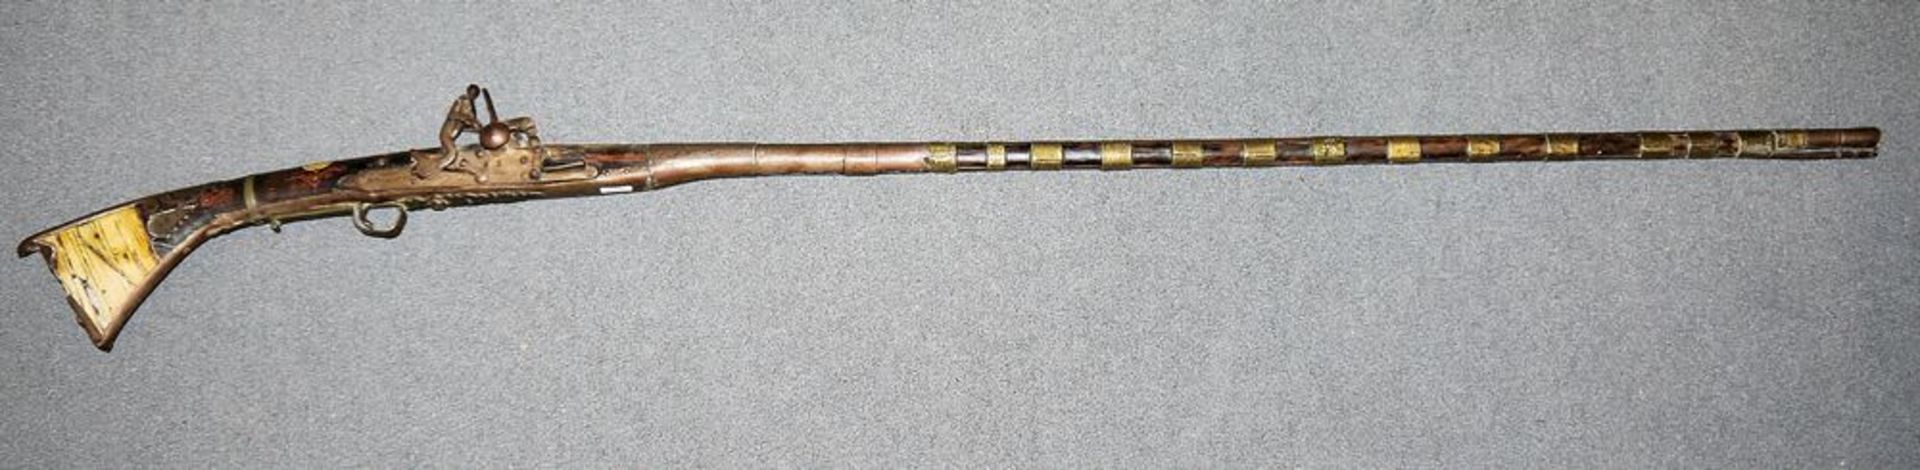 Long Moukhala, flintlock rifle of the Maghreb, 19th century - Image 2 of 2